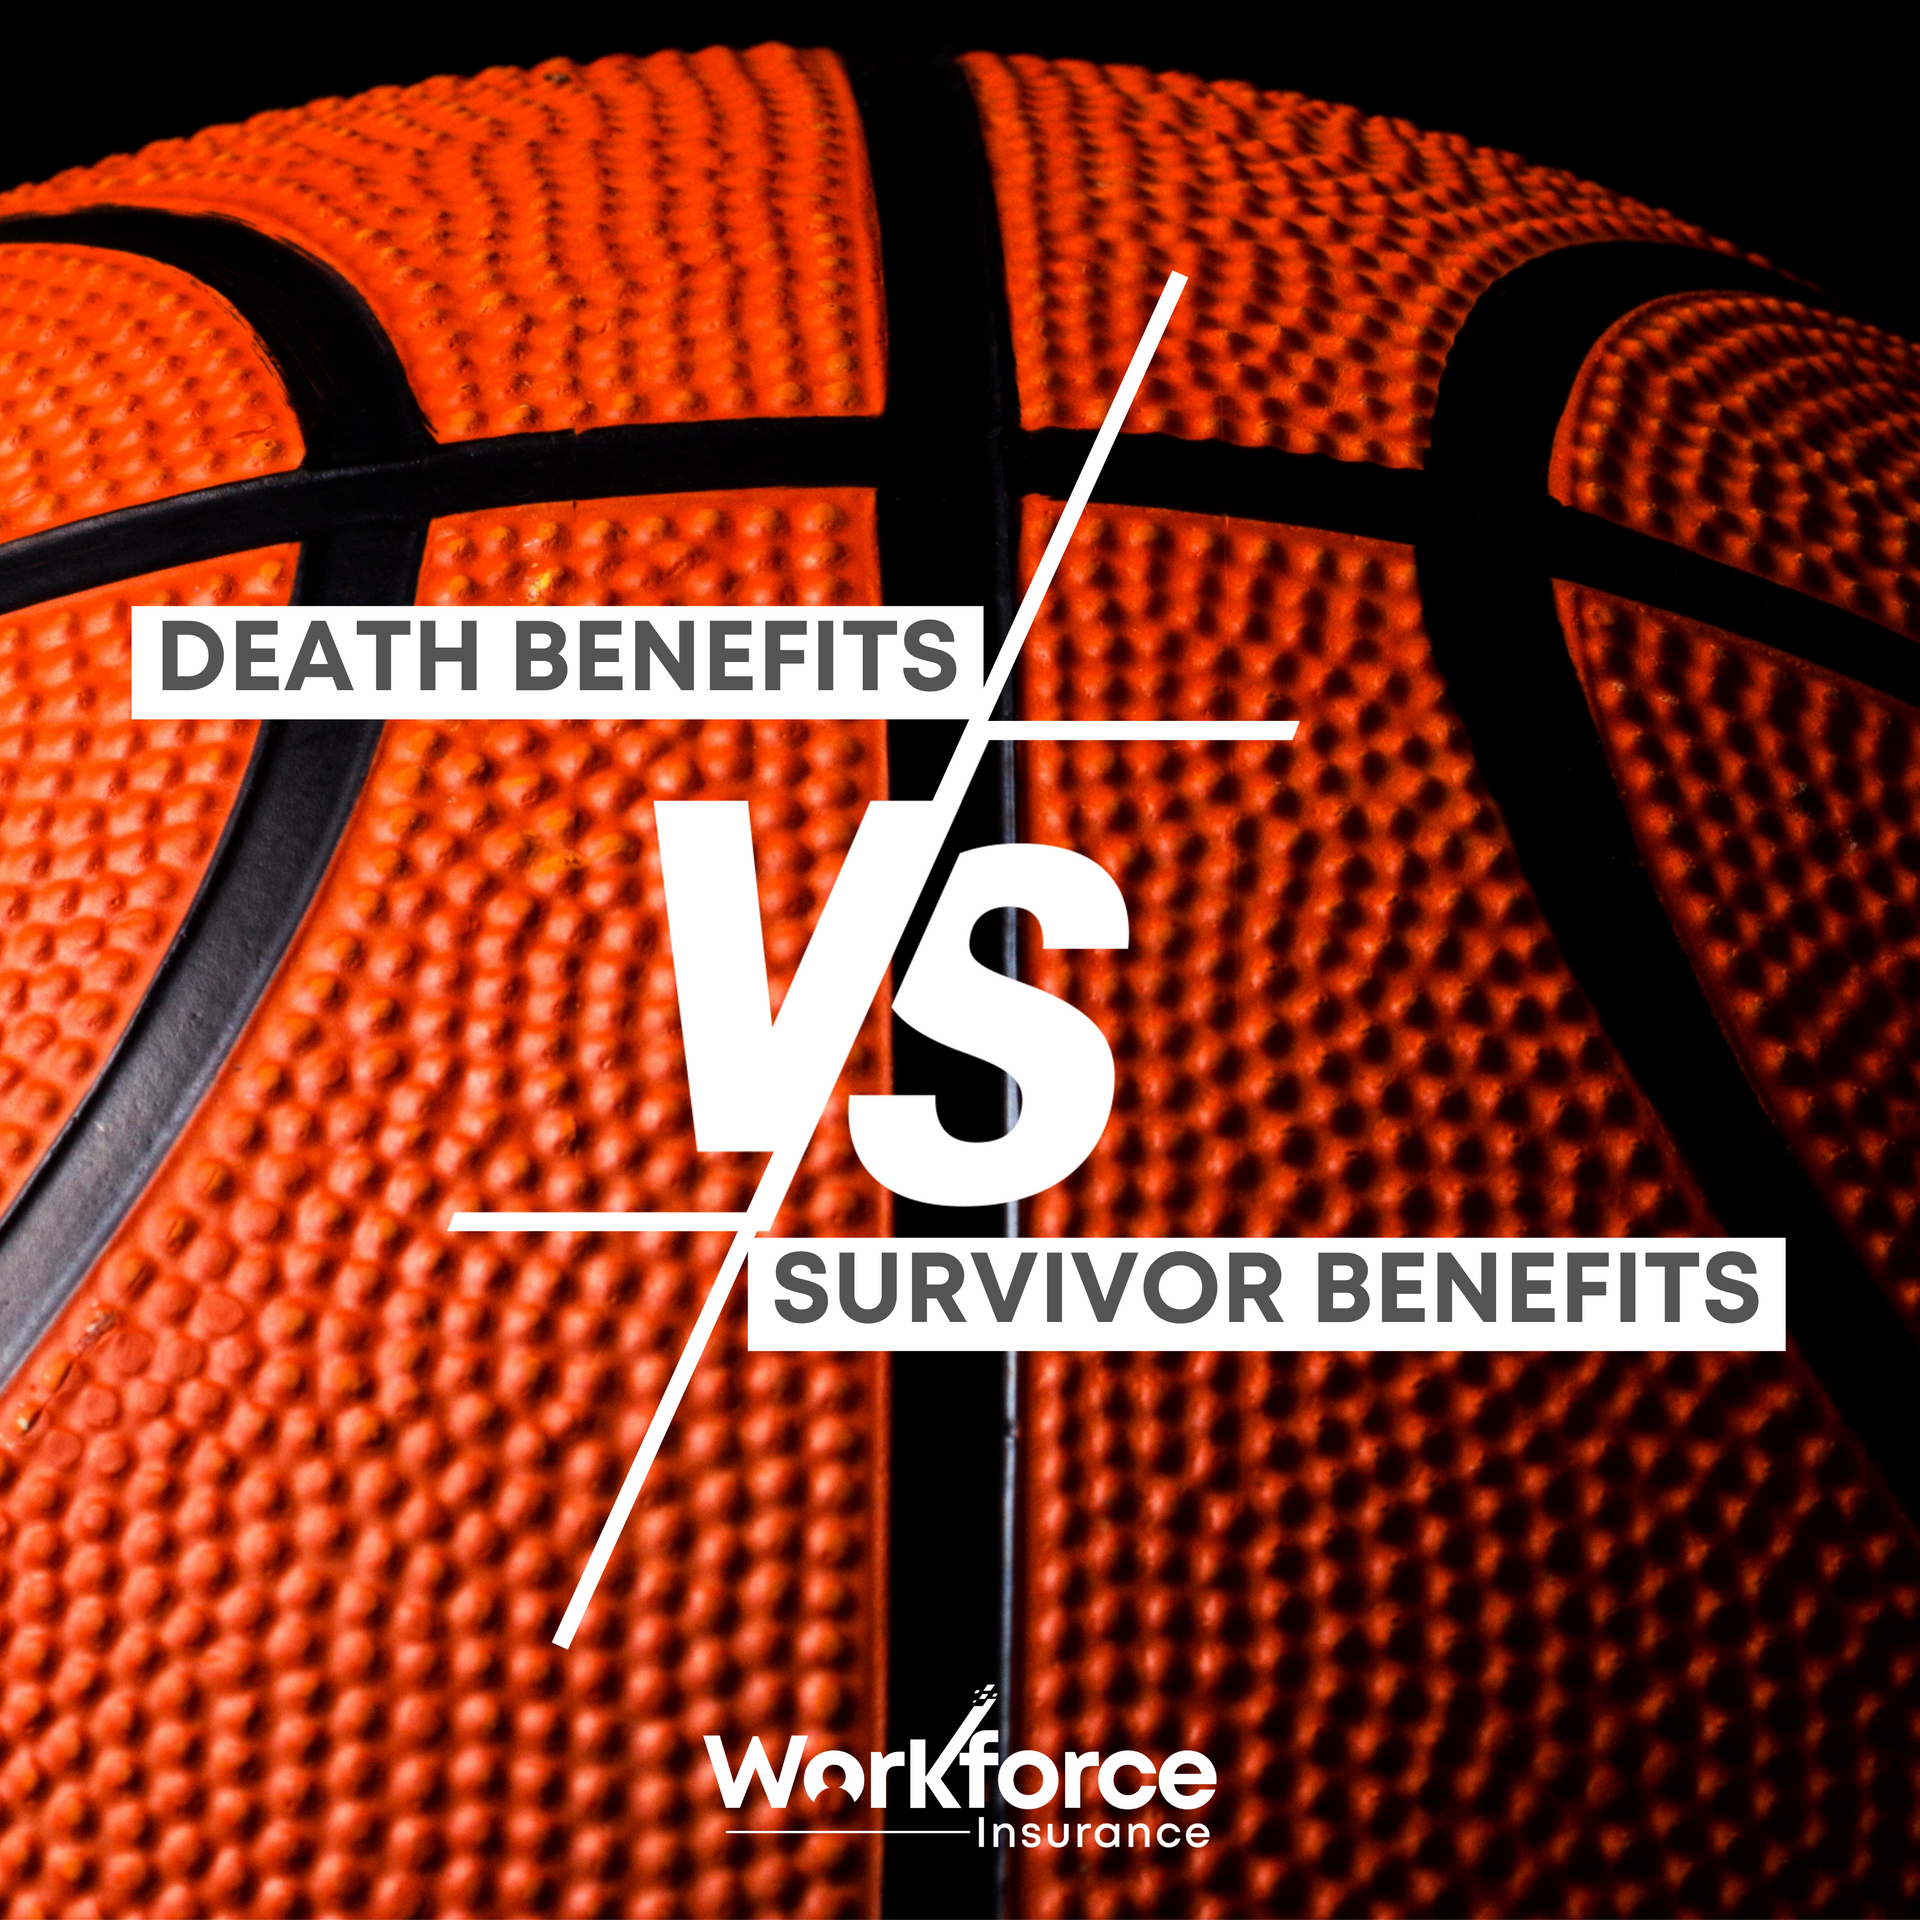 A close-up of a basketball with text overlay comparing Death benefits vs. Survivor benefits.